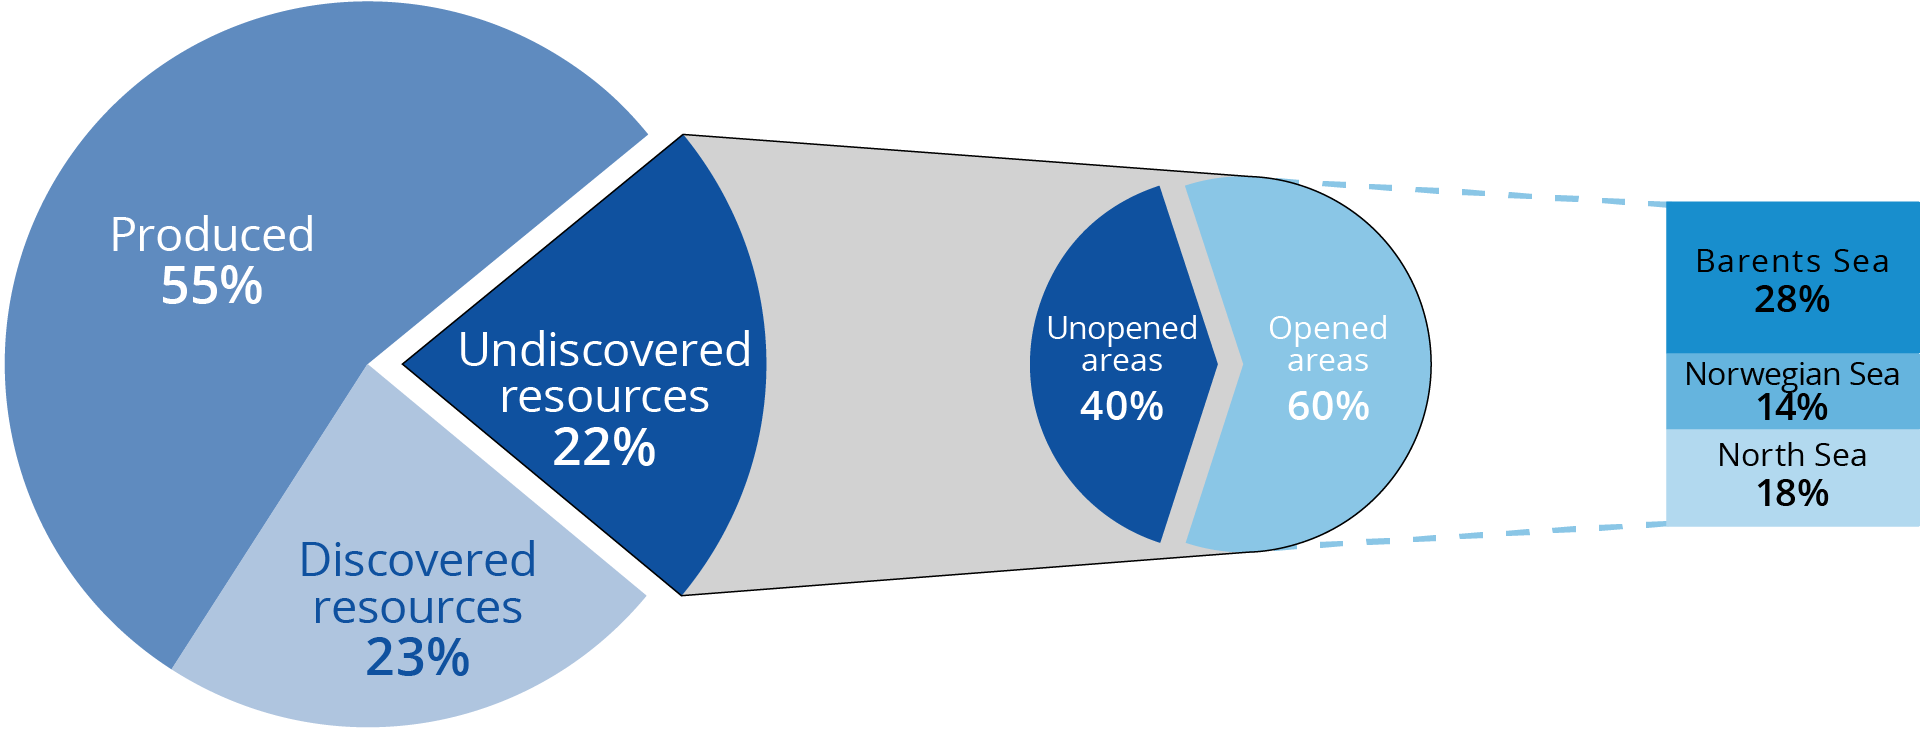 figure3-2-distribution-of-undiscovered-resources-across-opened-and-unopened-areas.png